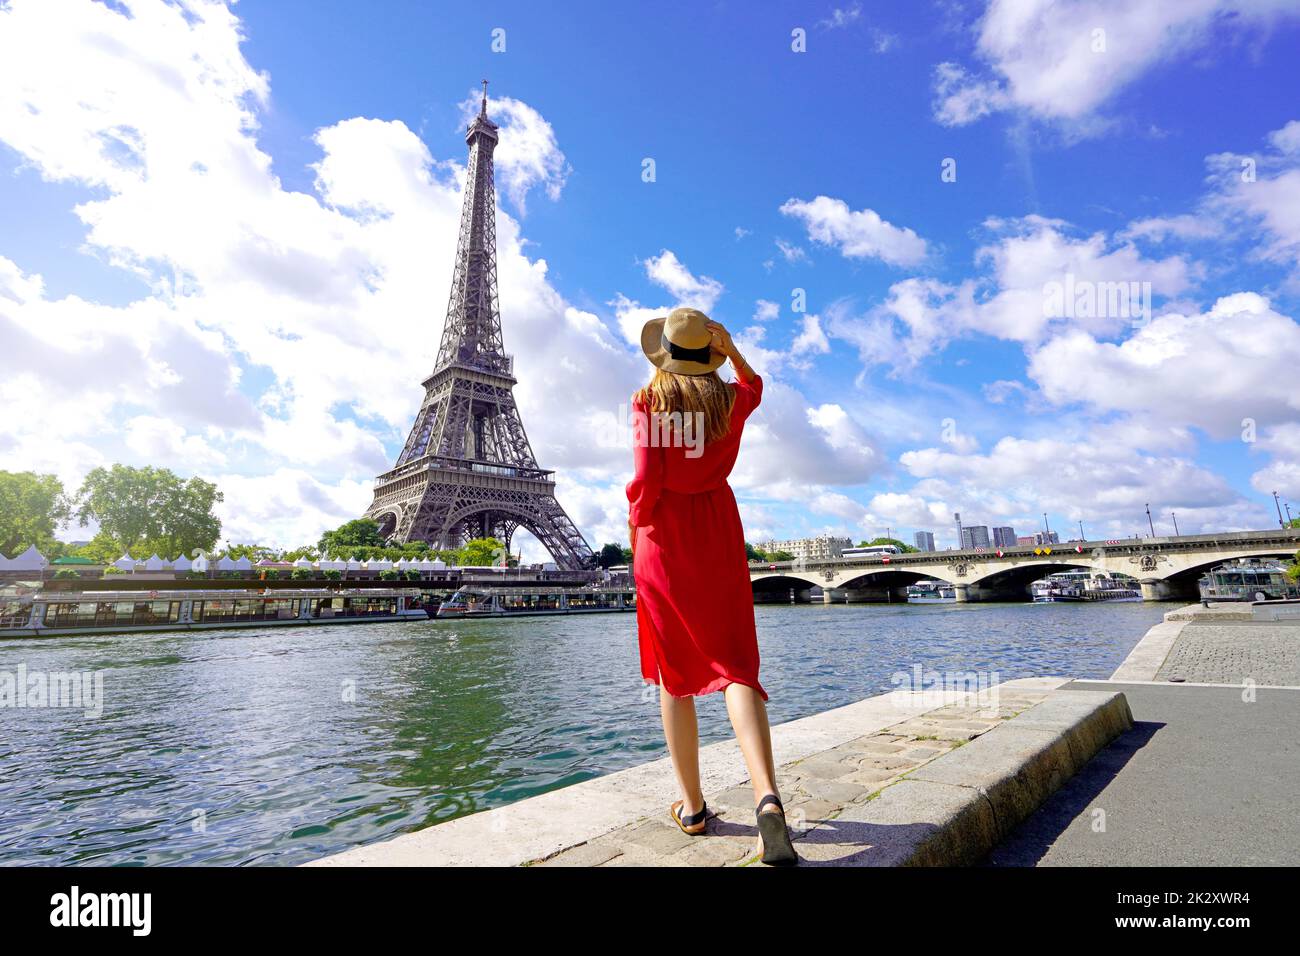 Tourism in Paris, France. Back view of young woman visiting the city of Paris with Eiffel Tower and Seine River. Stock Photo